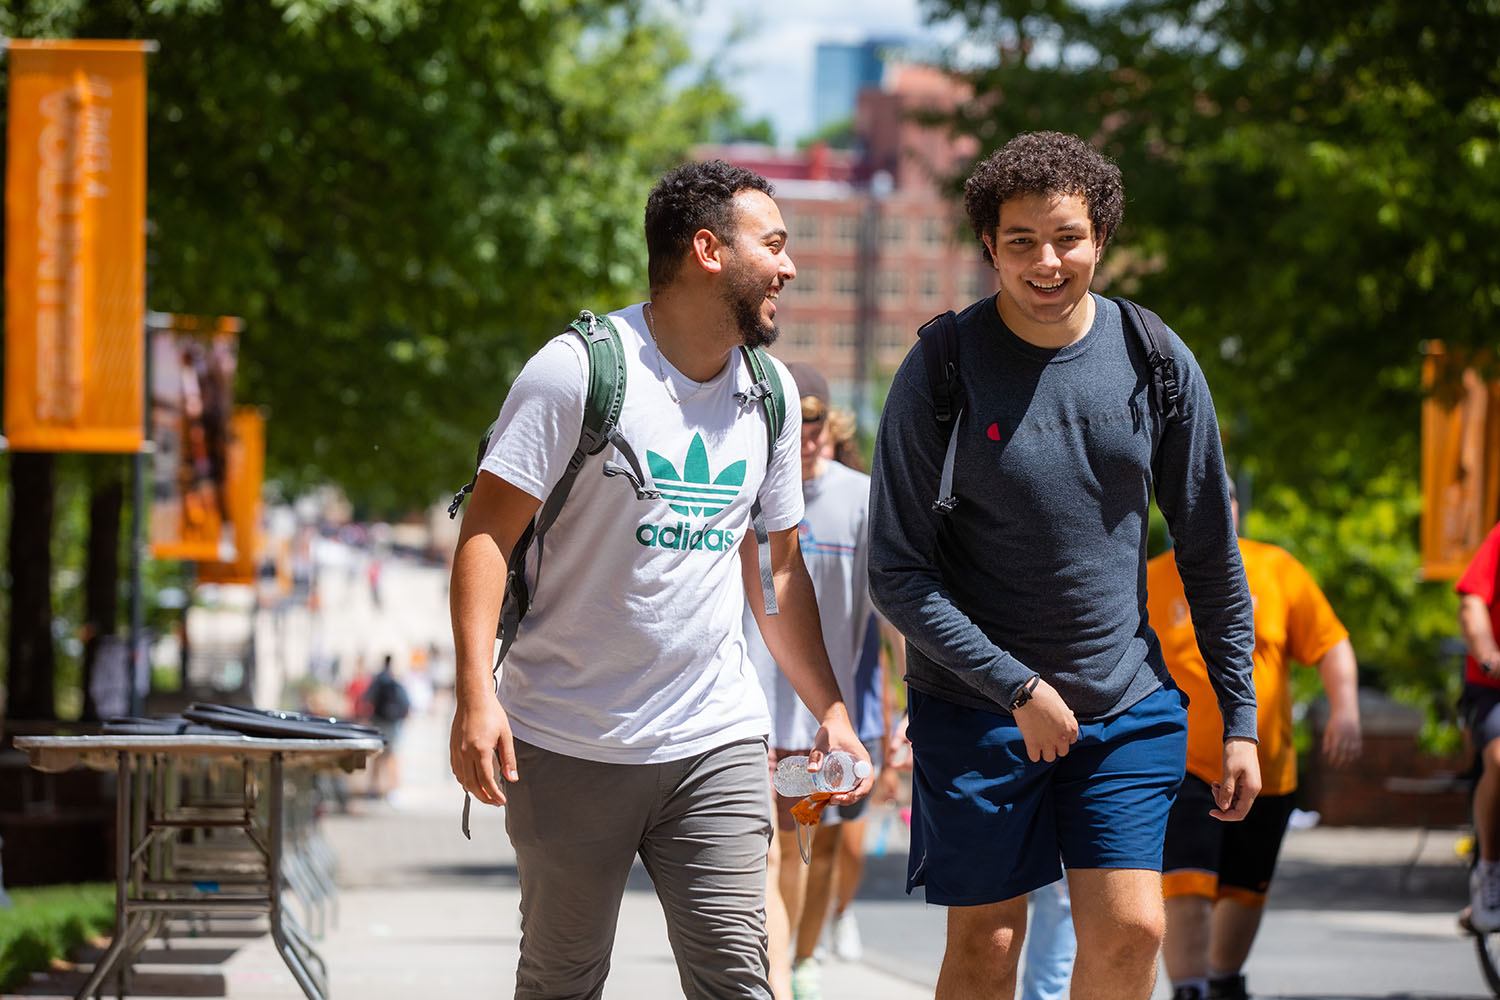 Two students walk on the pedestrian walkway.